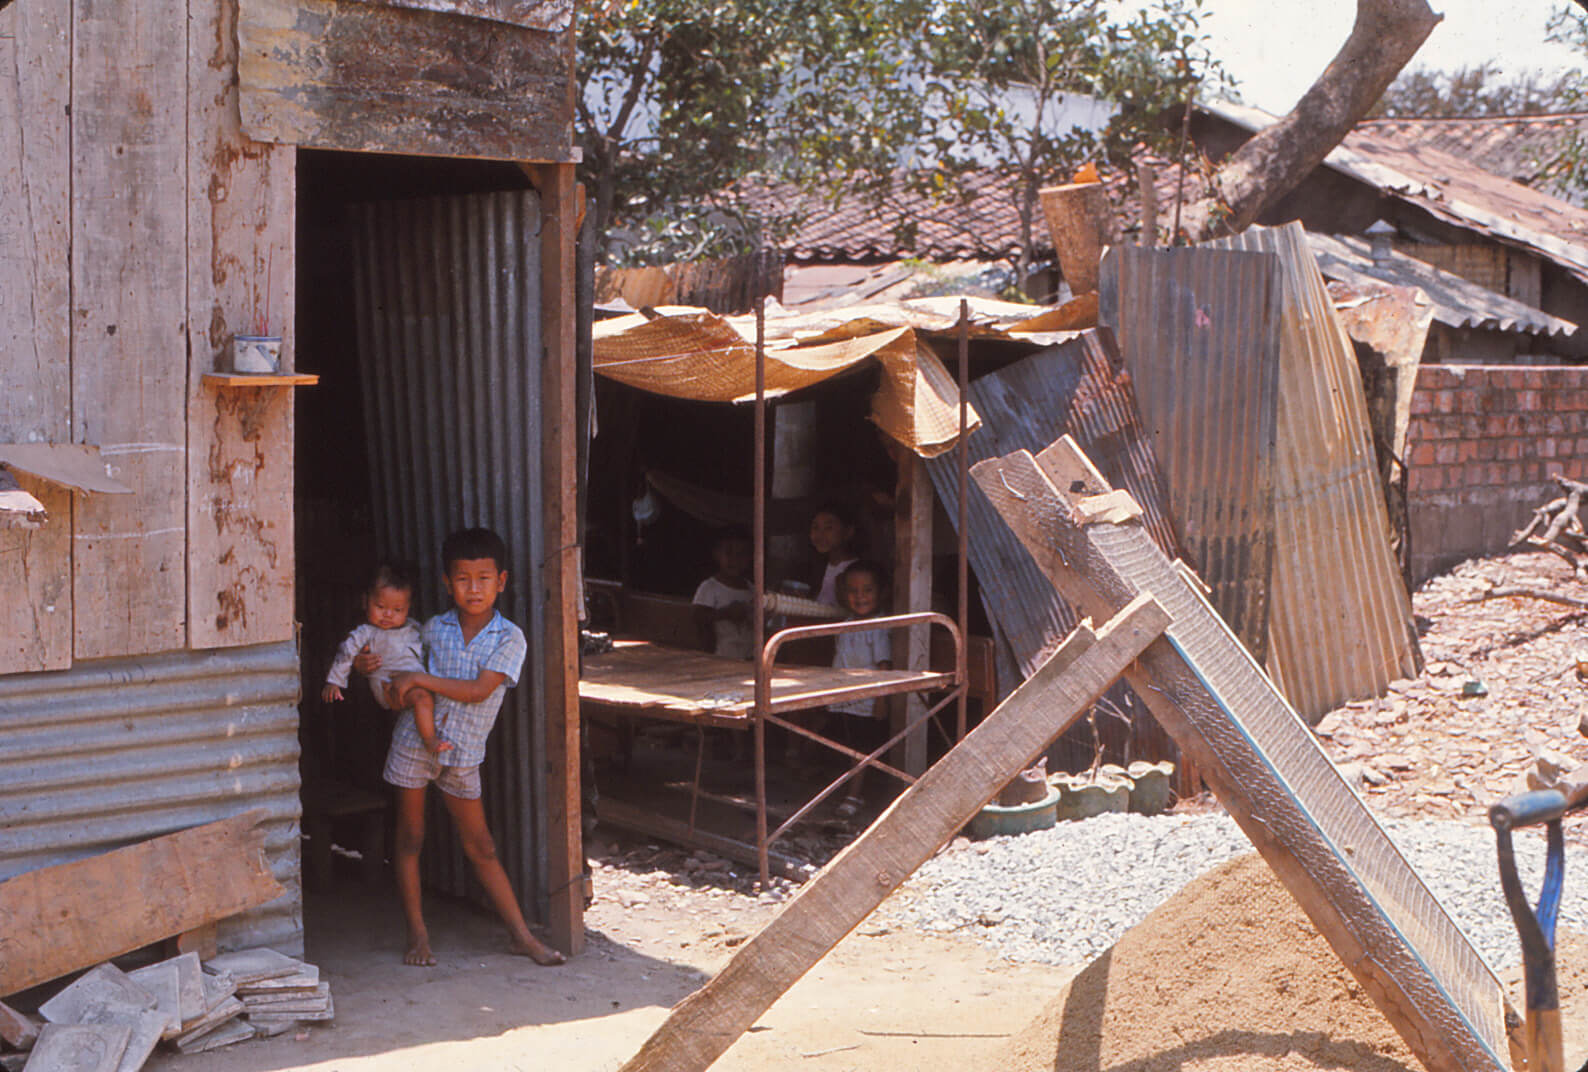 Young Vietnamese children standing in the doorways of temporary shelters constructed out of wood and corrugated steel.